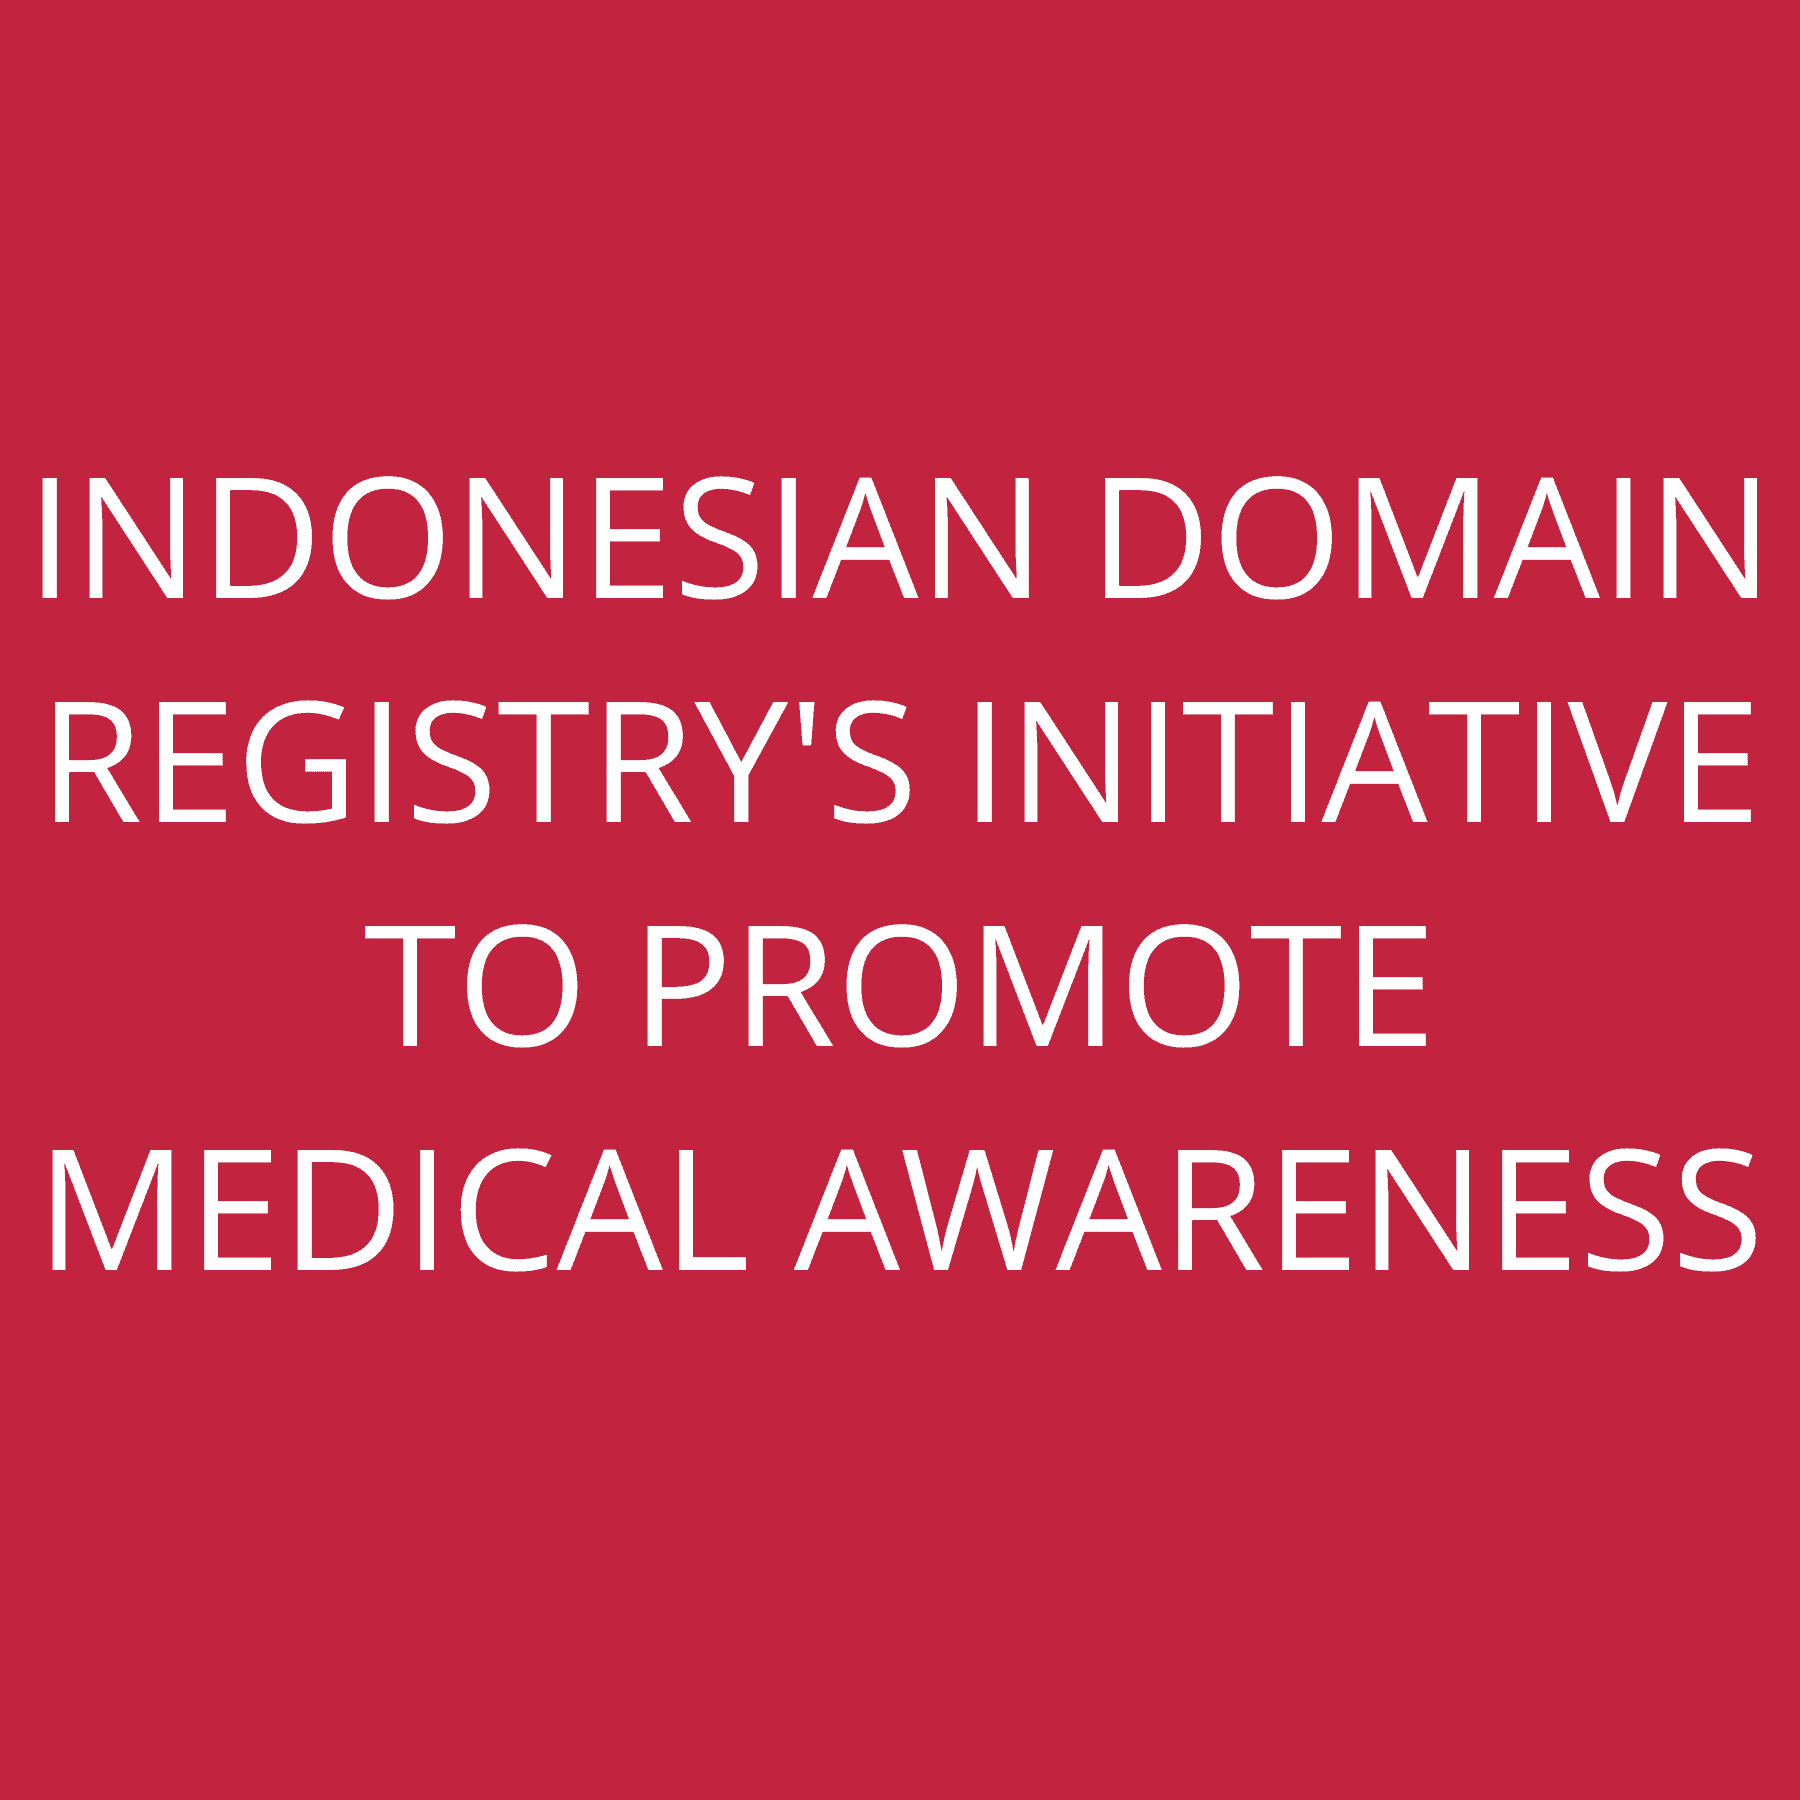 Indonesian Domain registry’s initiative to promote medical awareness